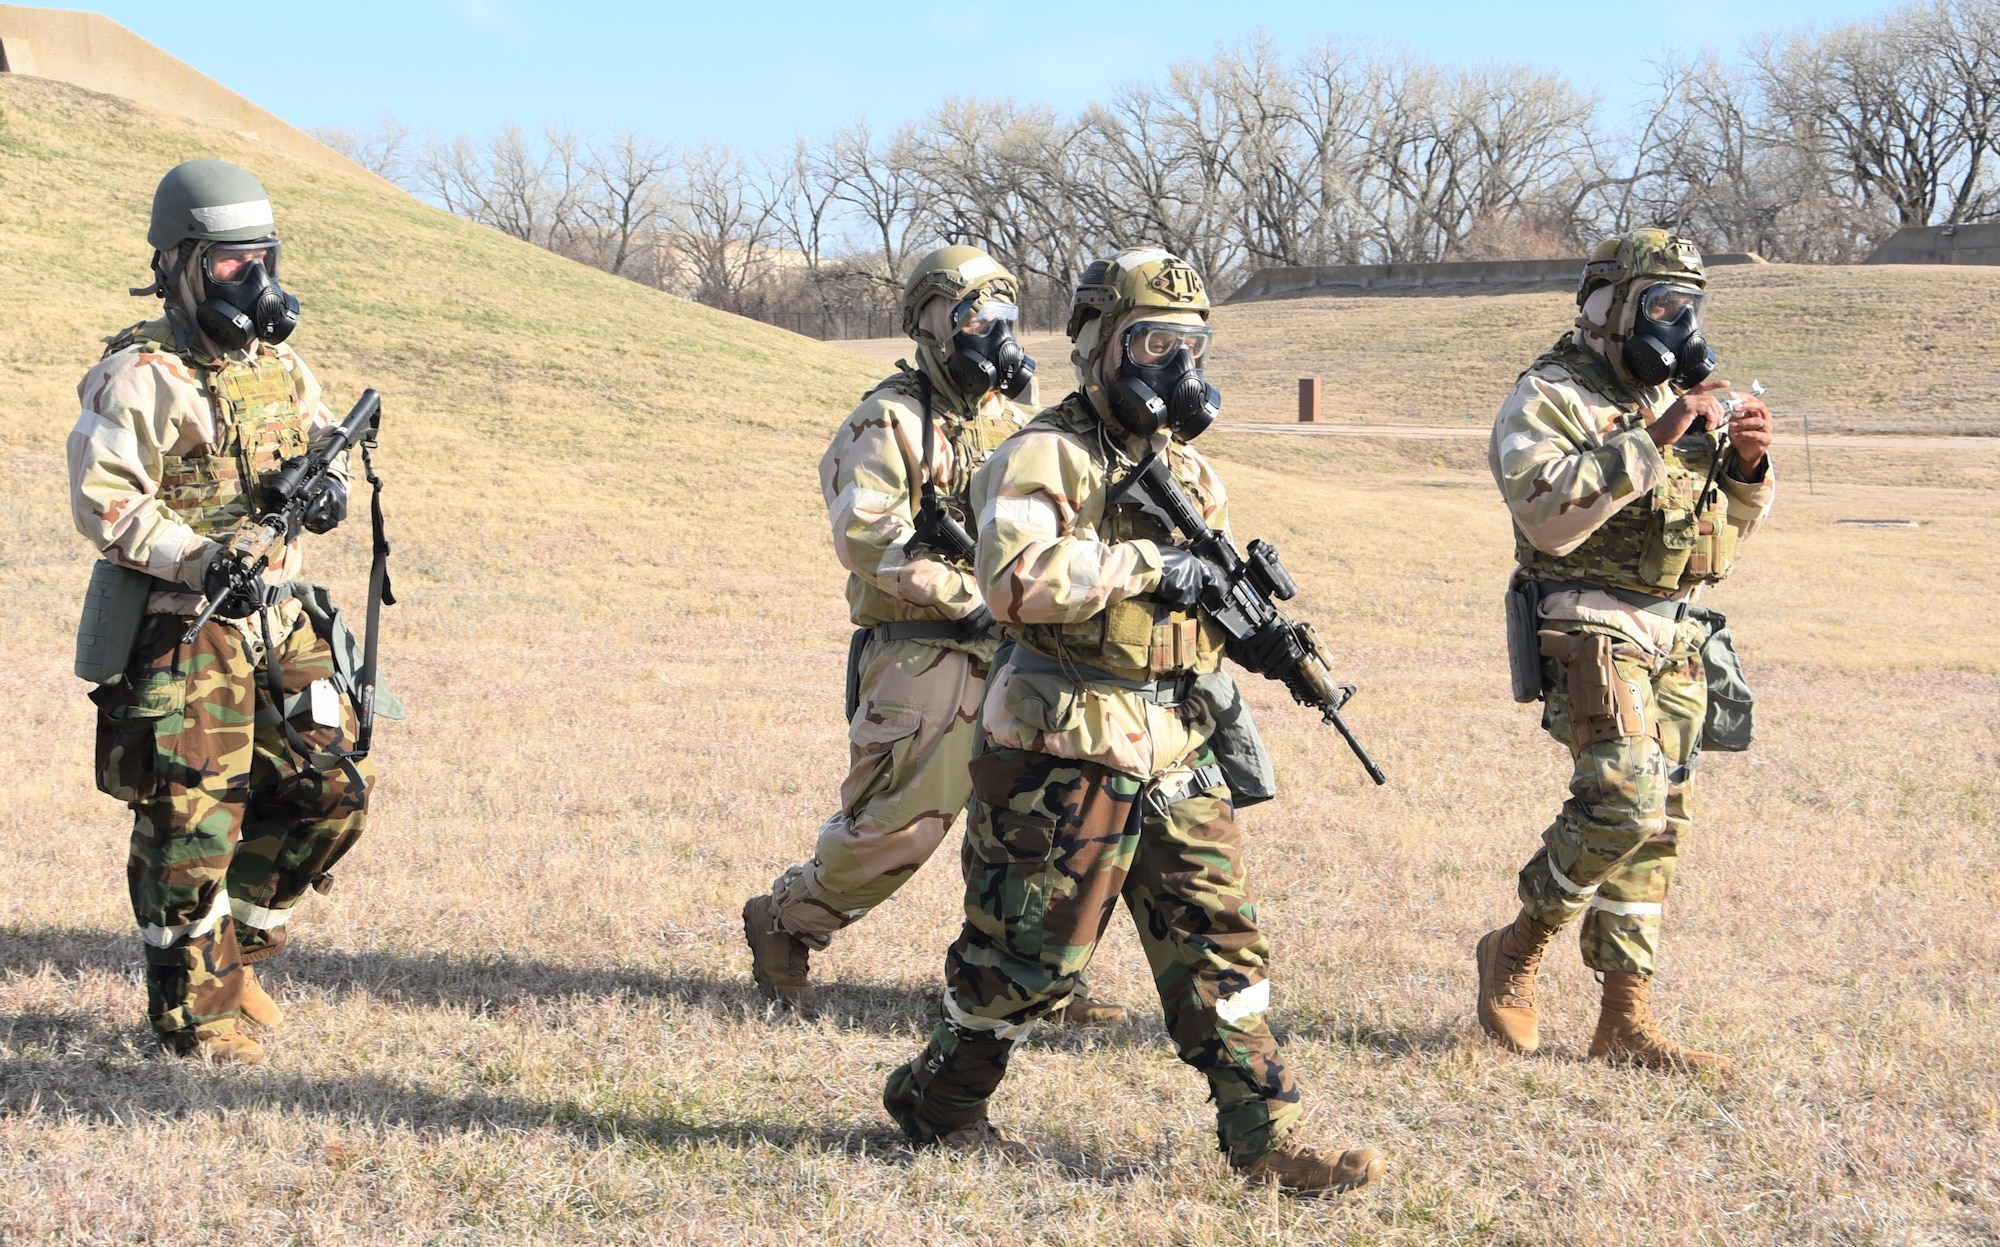 Four Airmen from the 931st Civil Engineer Squadron rush to their tent as part of routine readiness exercise March 5